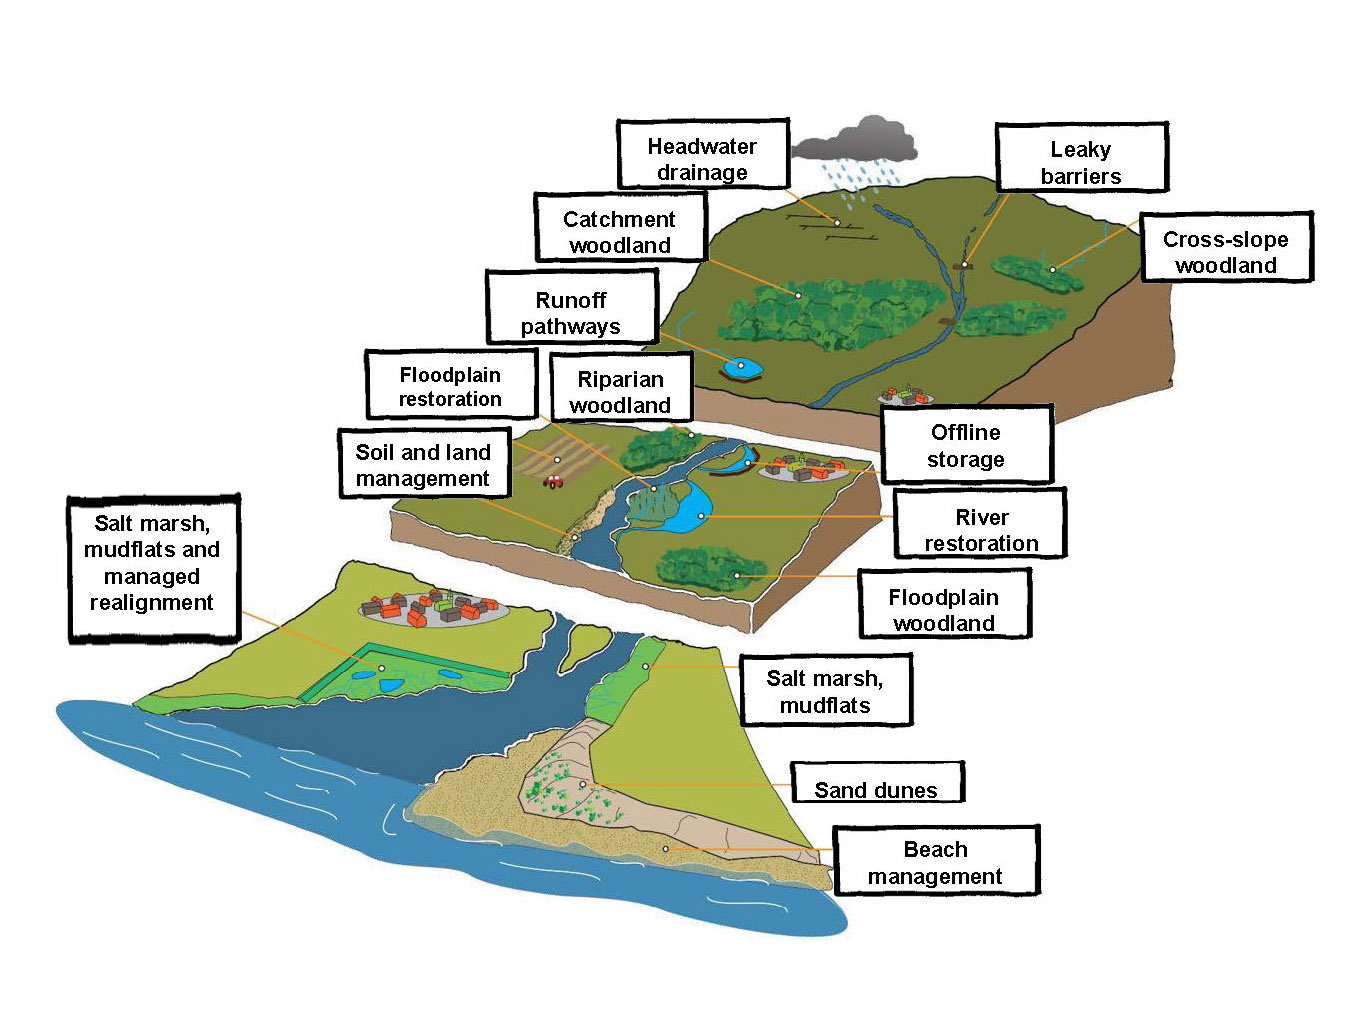 Diagram showing various natural flood management techniques through the landscape from upland to sea